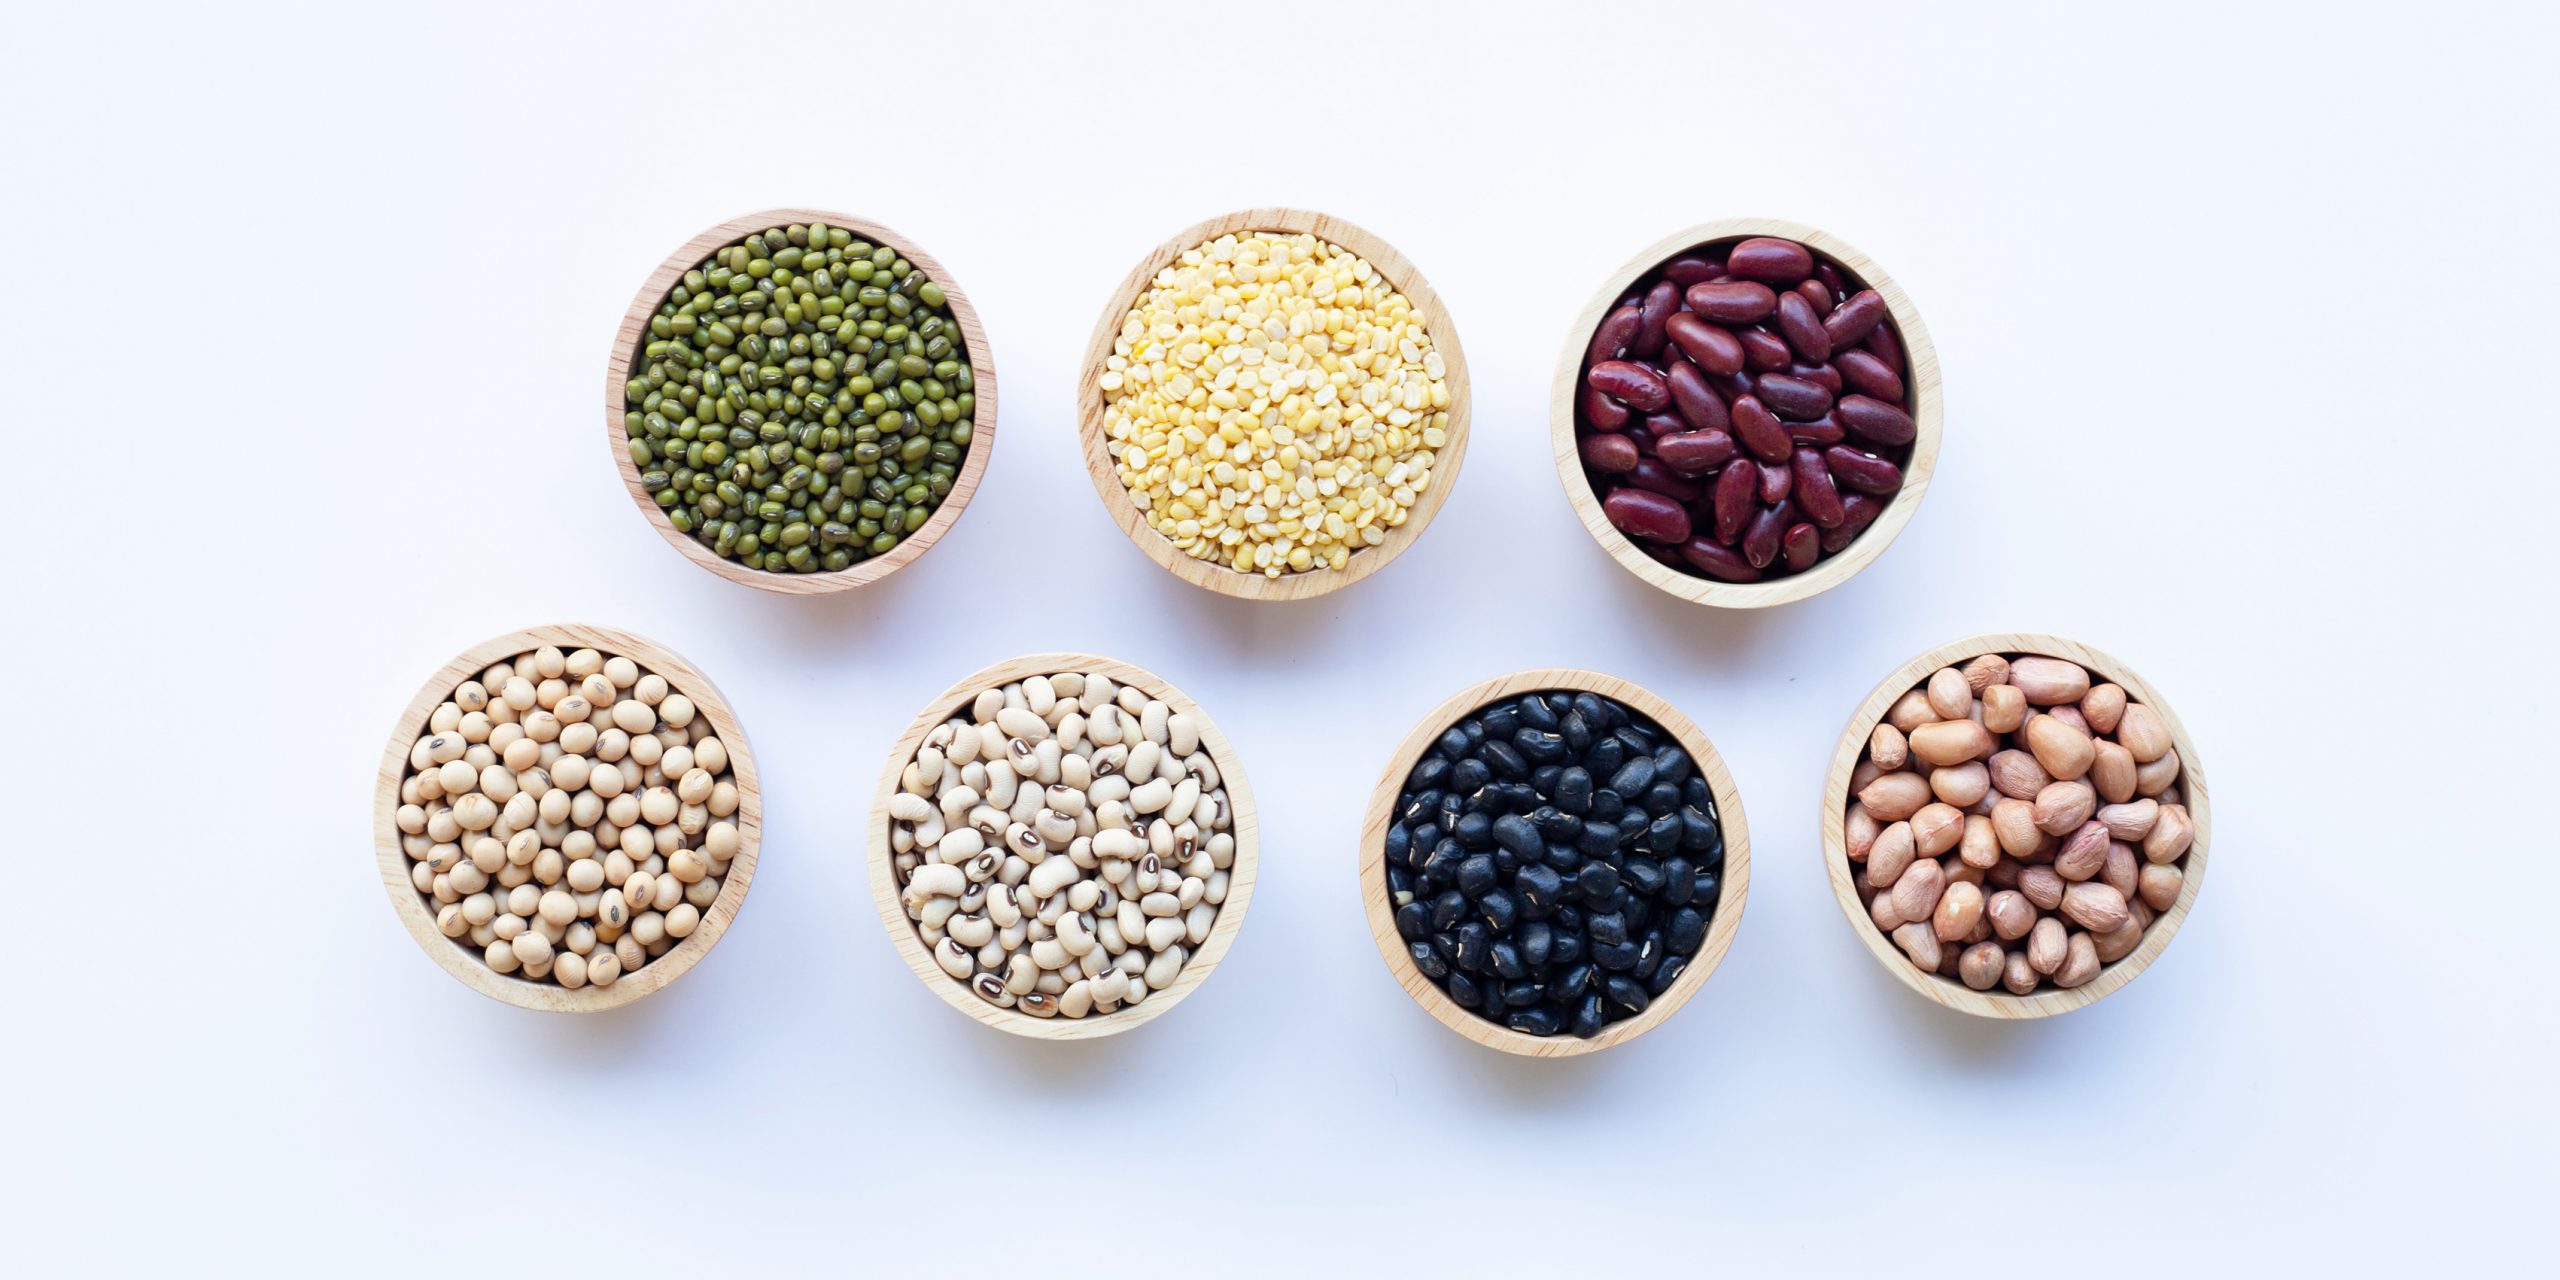 Top 5 Seeds for Weight Loss and How to Incorporate Them